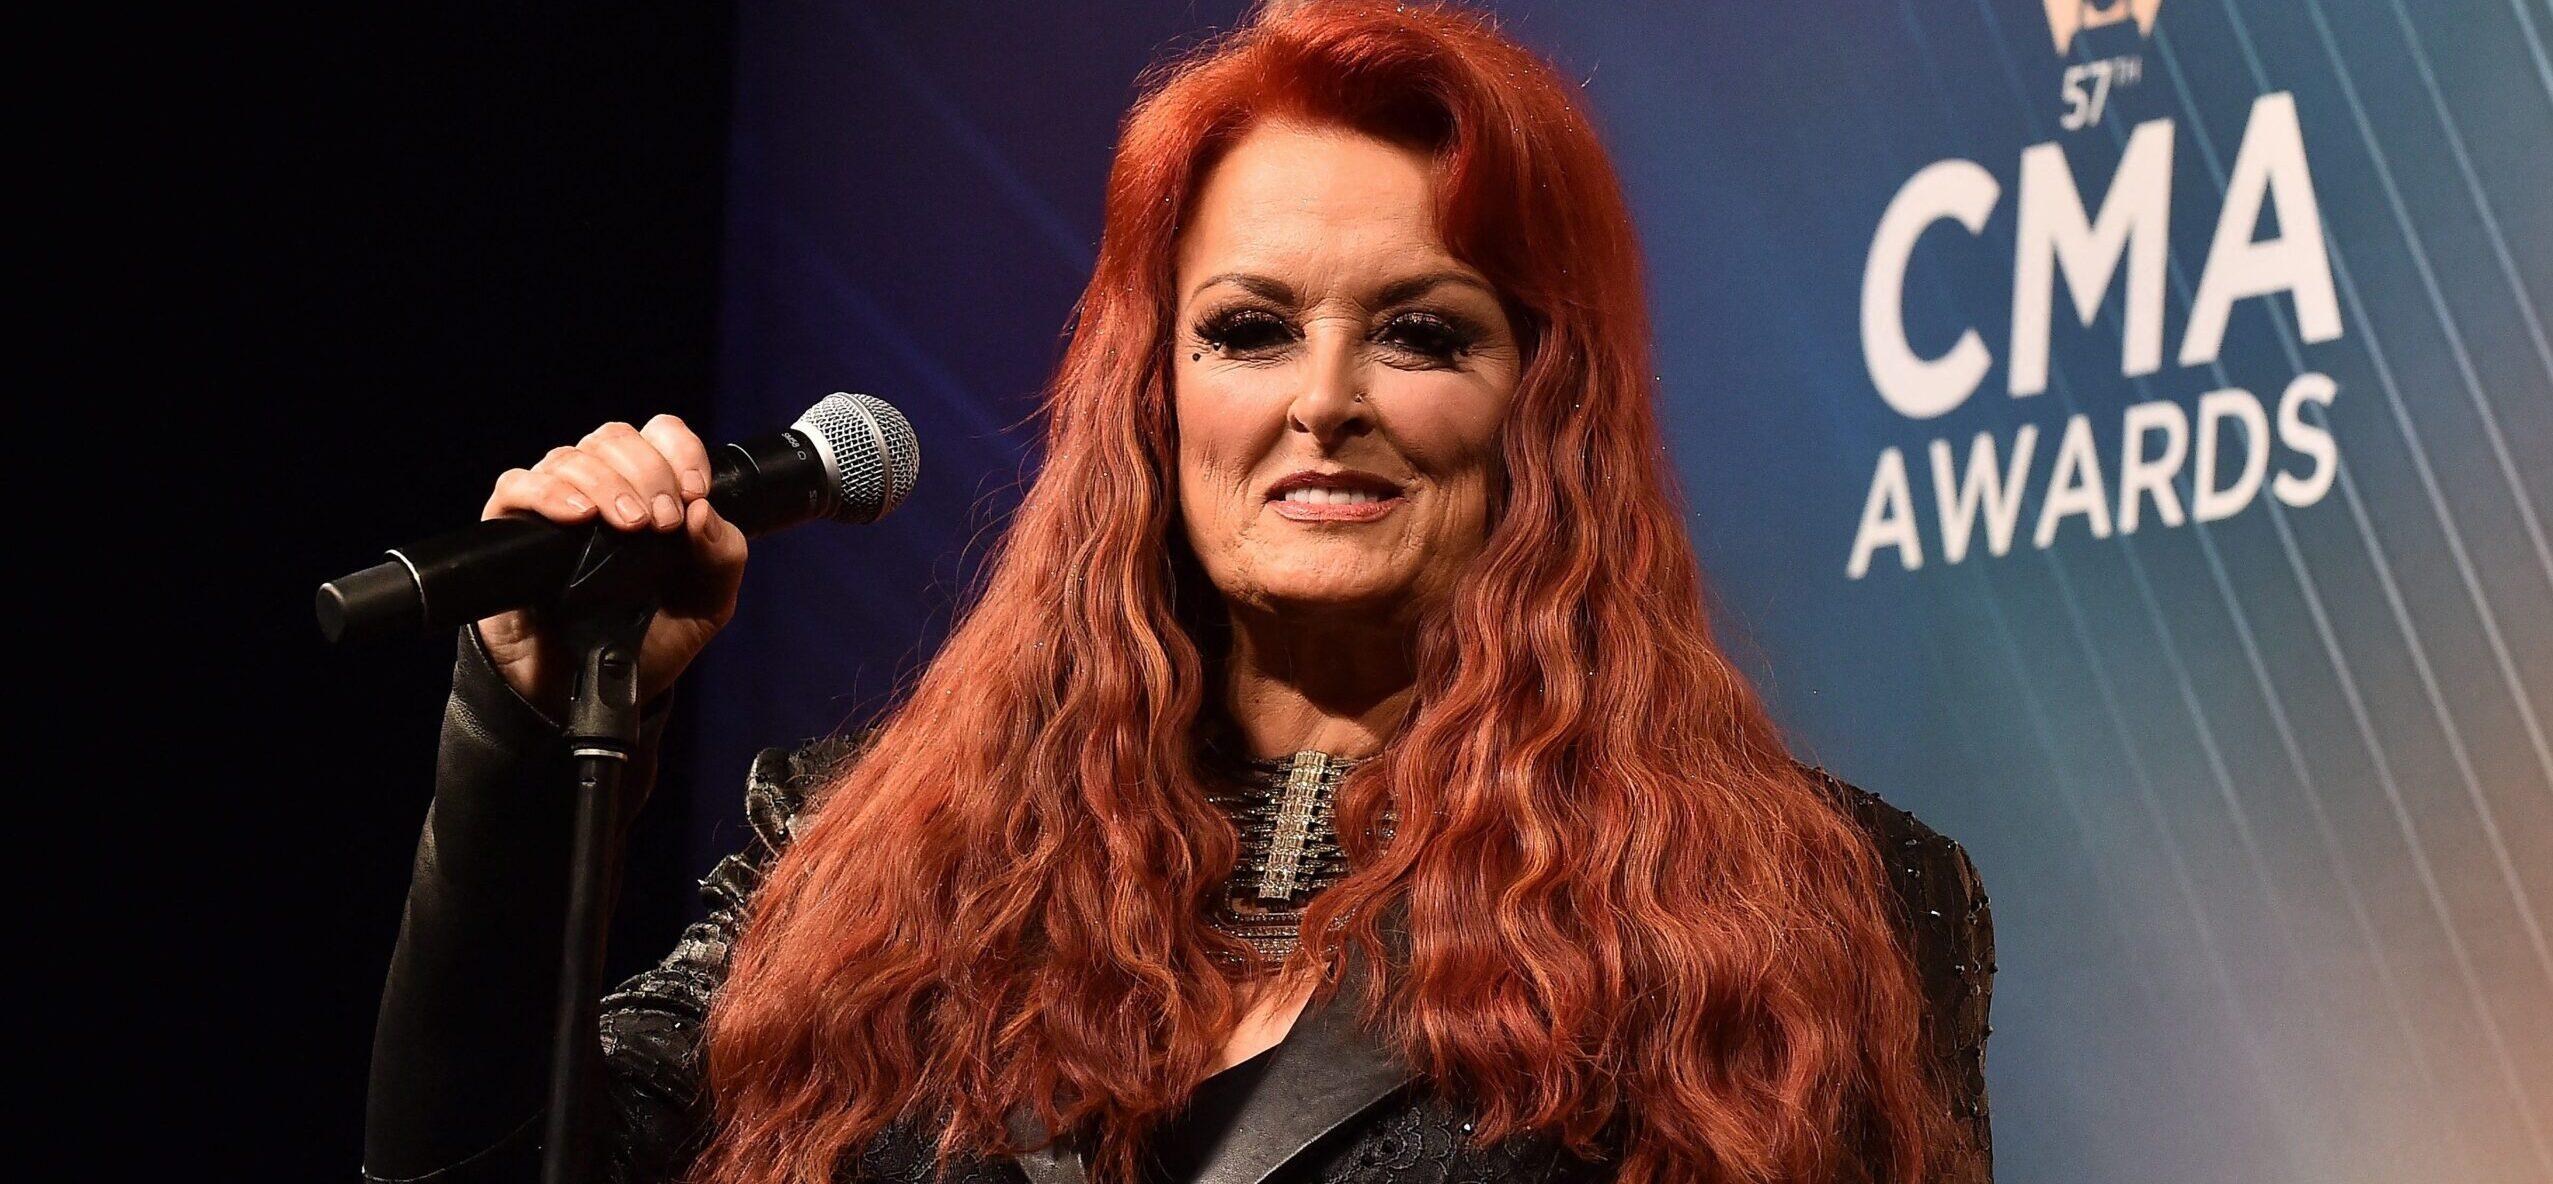 Wynonna Judd Reacts To CMA Awards Concern: ‘I Could Cry Right Now’